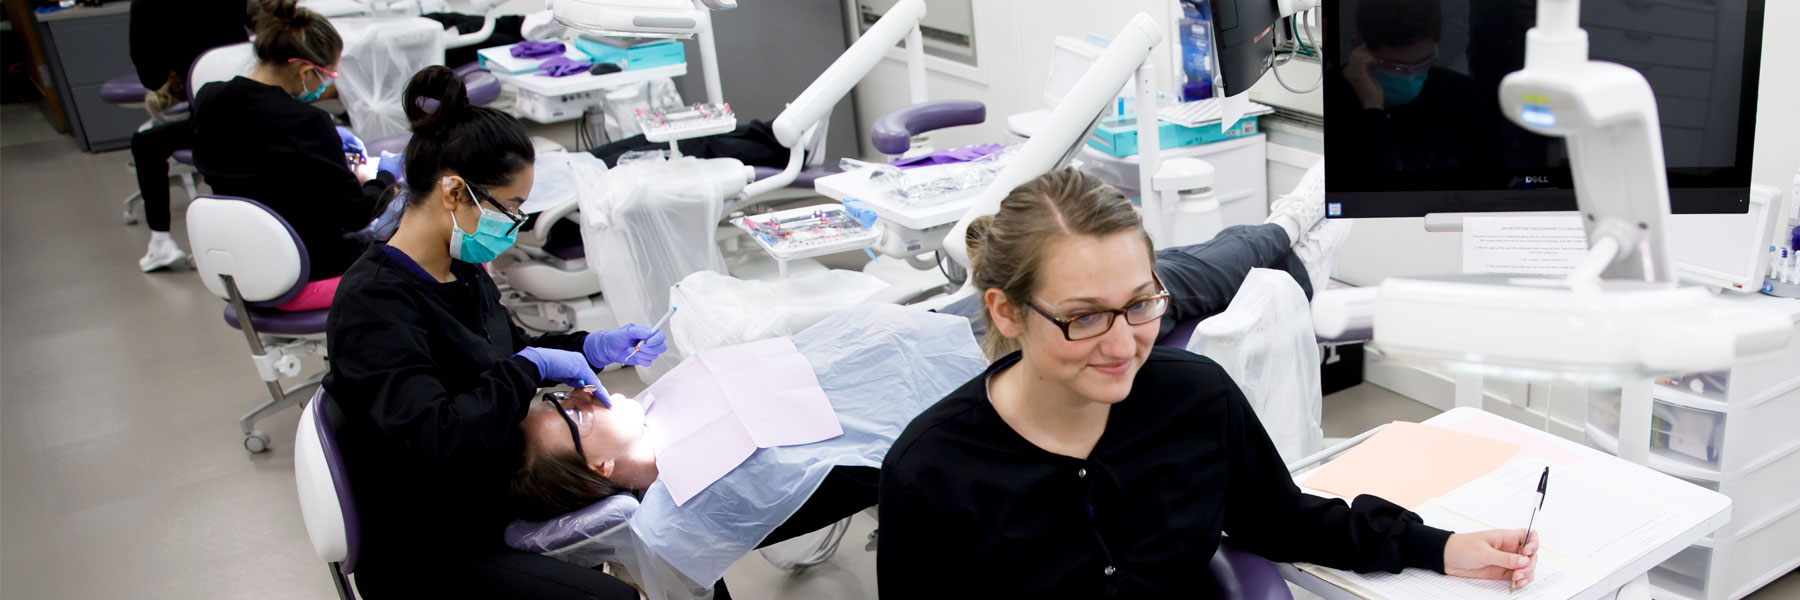 A row of dental hygienists work on patients' teeth as they sit in exam chairs.